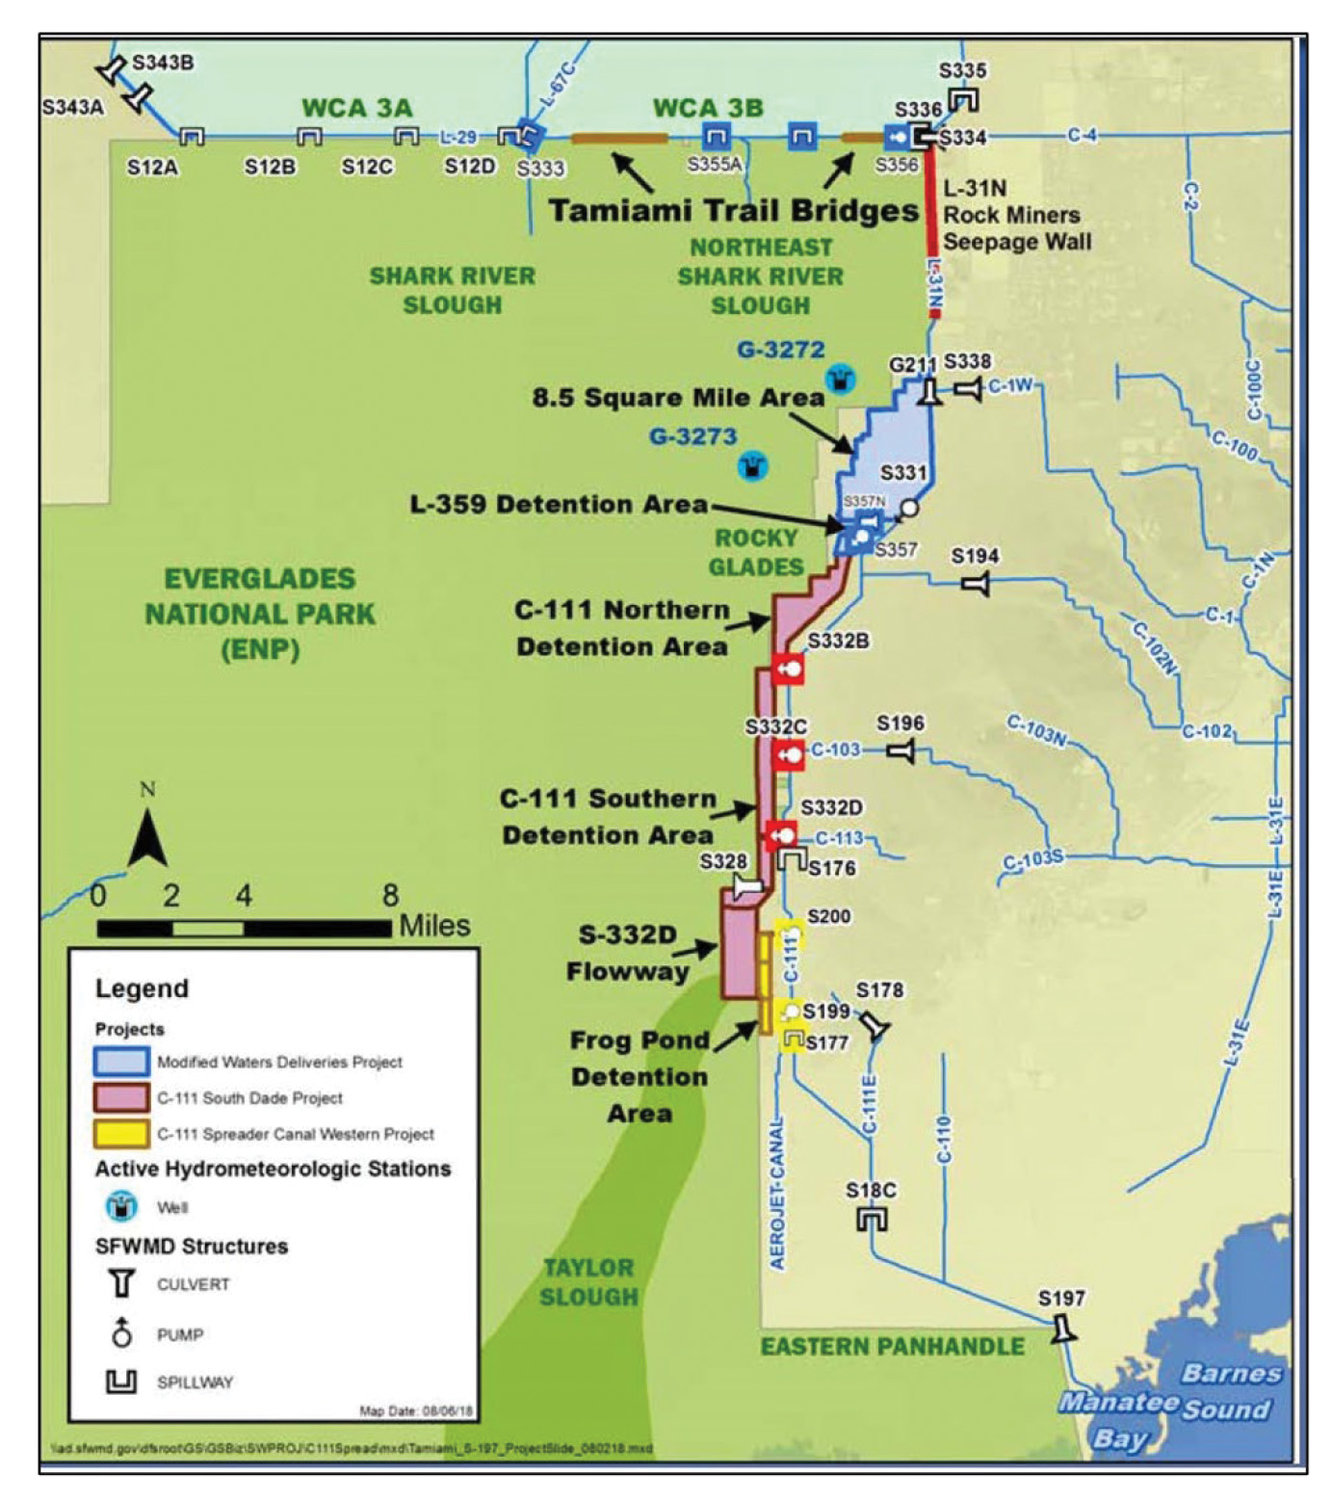 Flow under the Tamiami Trail to Everglades National Park has increased thanks to CERP projects. [Art courtesy USACE]